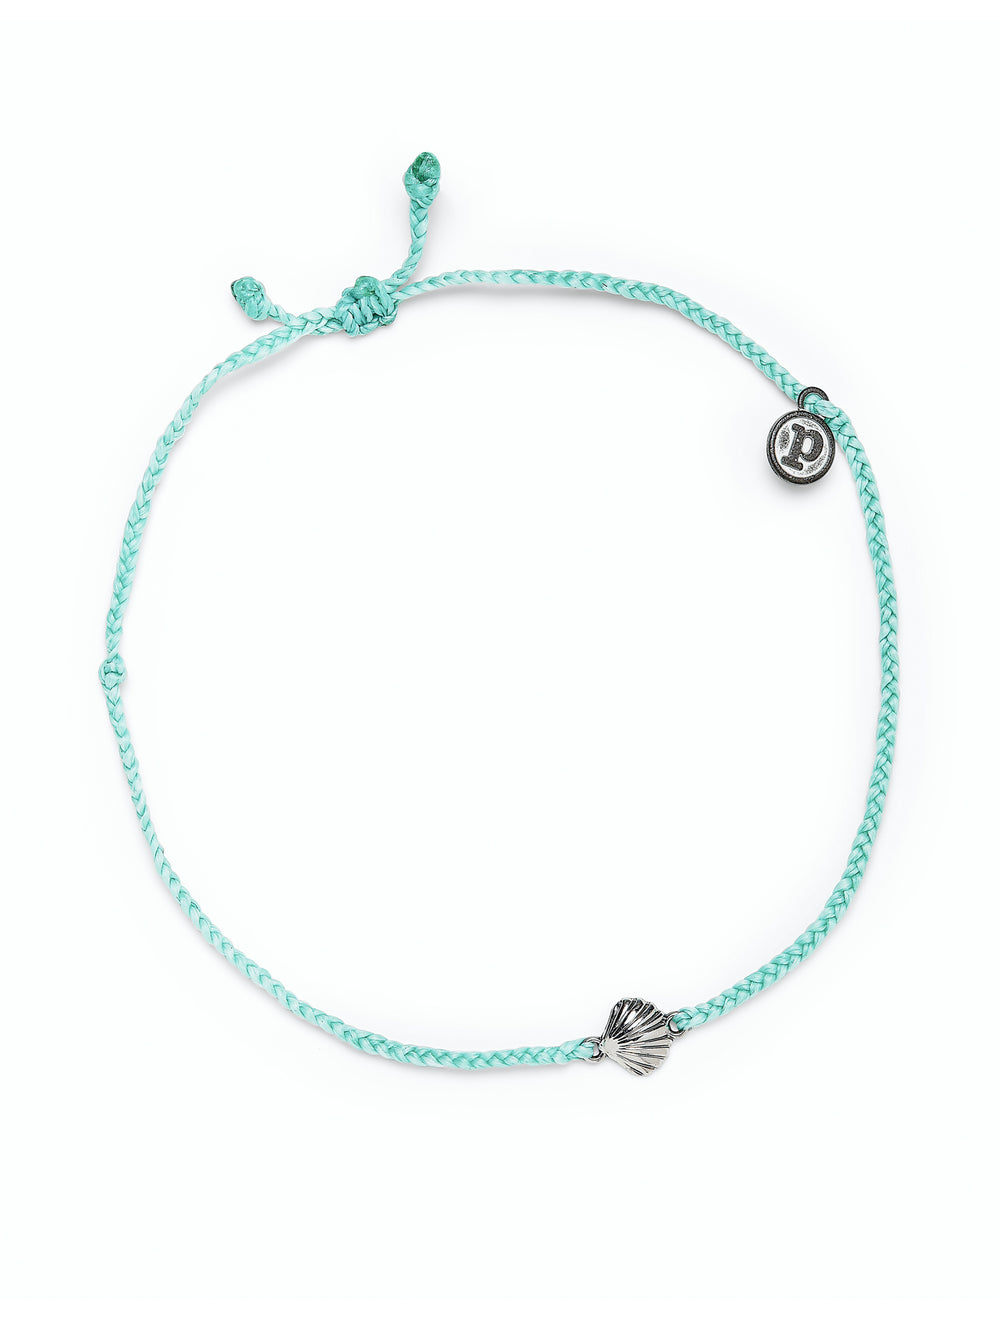 PURA VIDA SCALLOP CHARM ANKLET - CLEARANCE